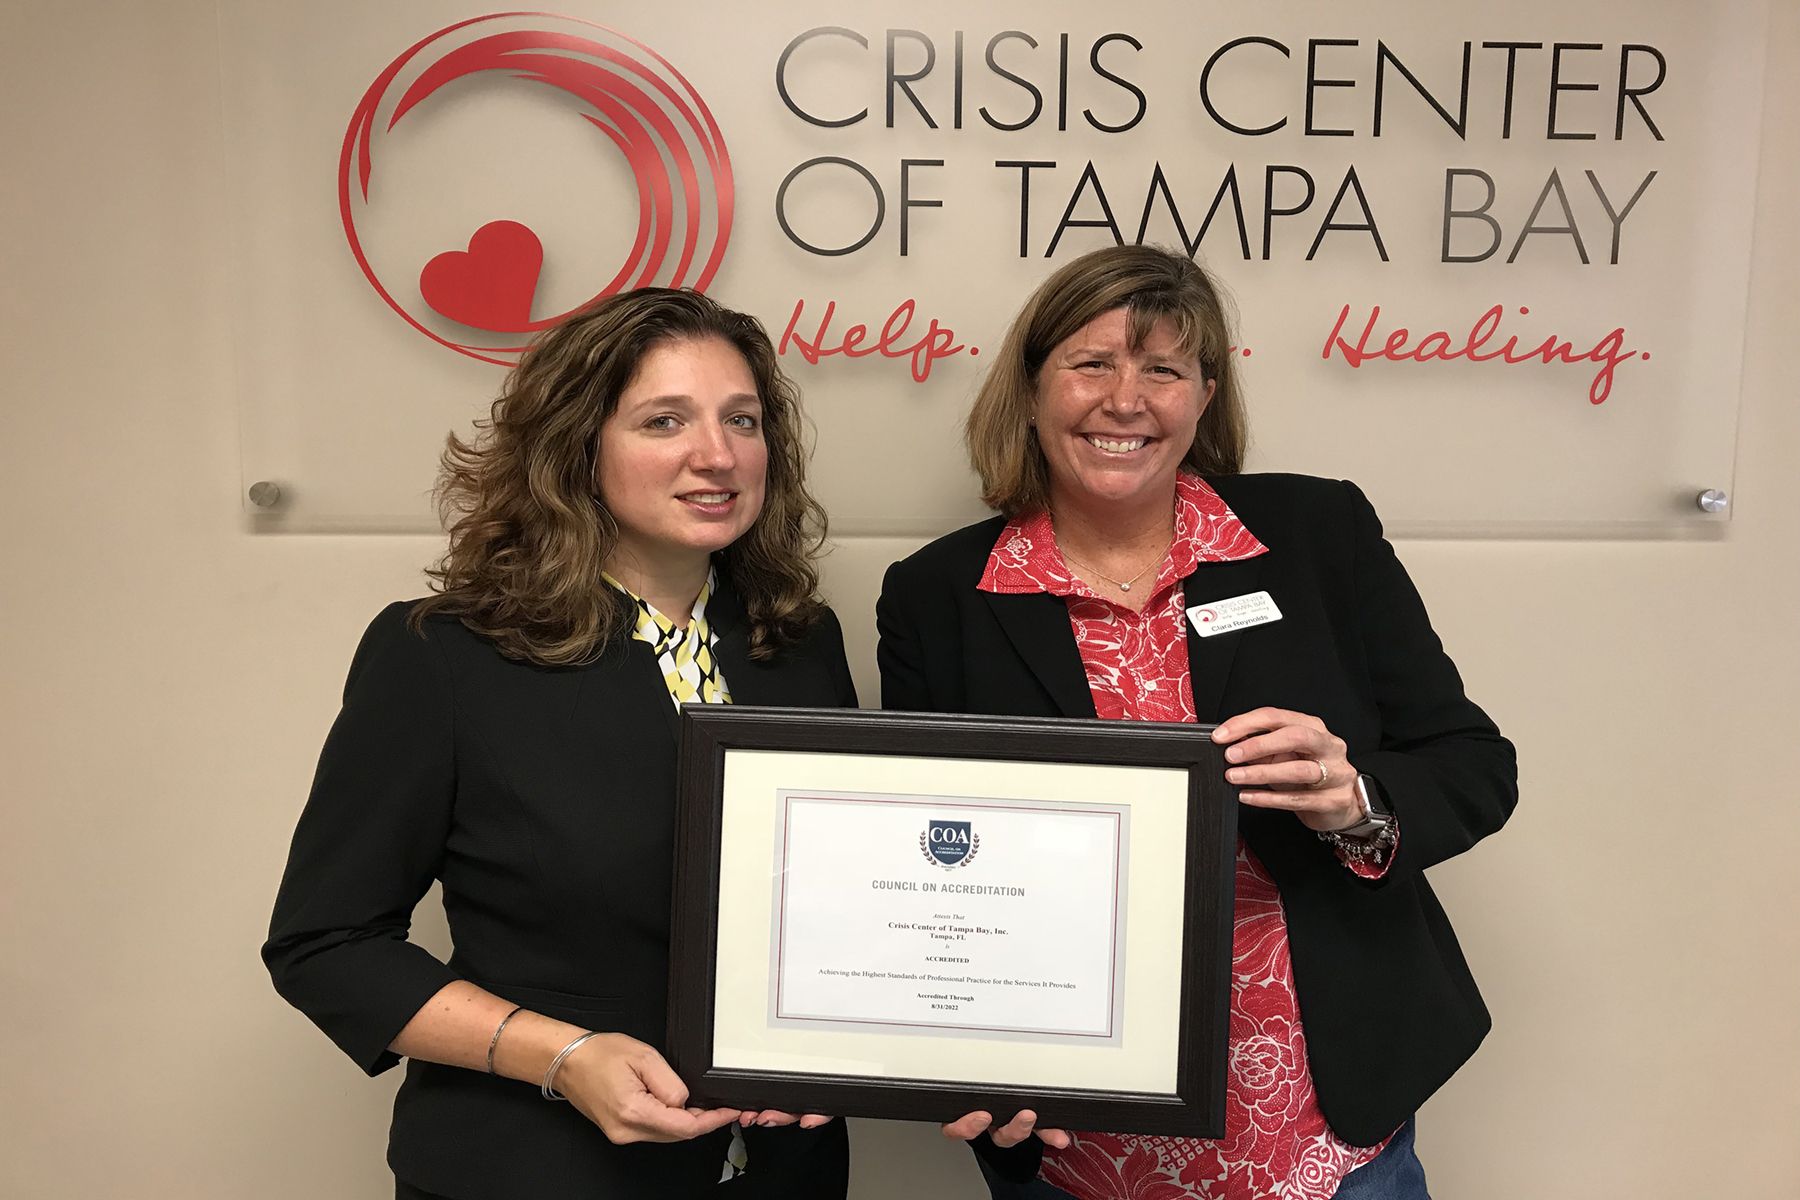 ►After an 18-month evaluation process, the Crisis Center of Tampa Bay was accredited by the Council on Accreditation, a nonprofit accreditor of human services organization, through 2022.